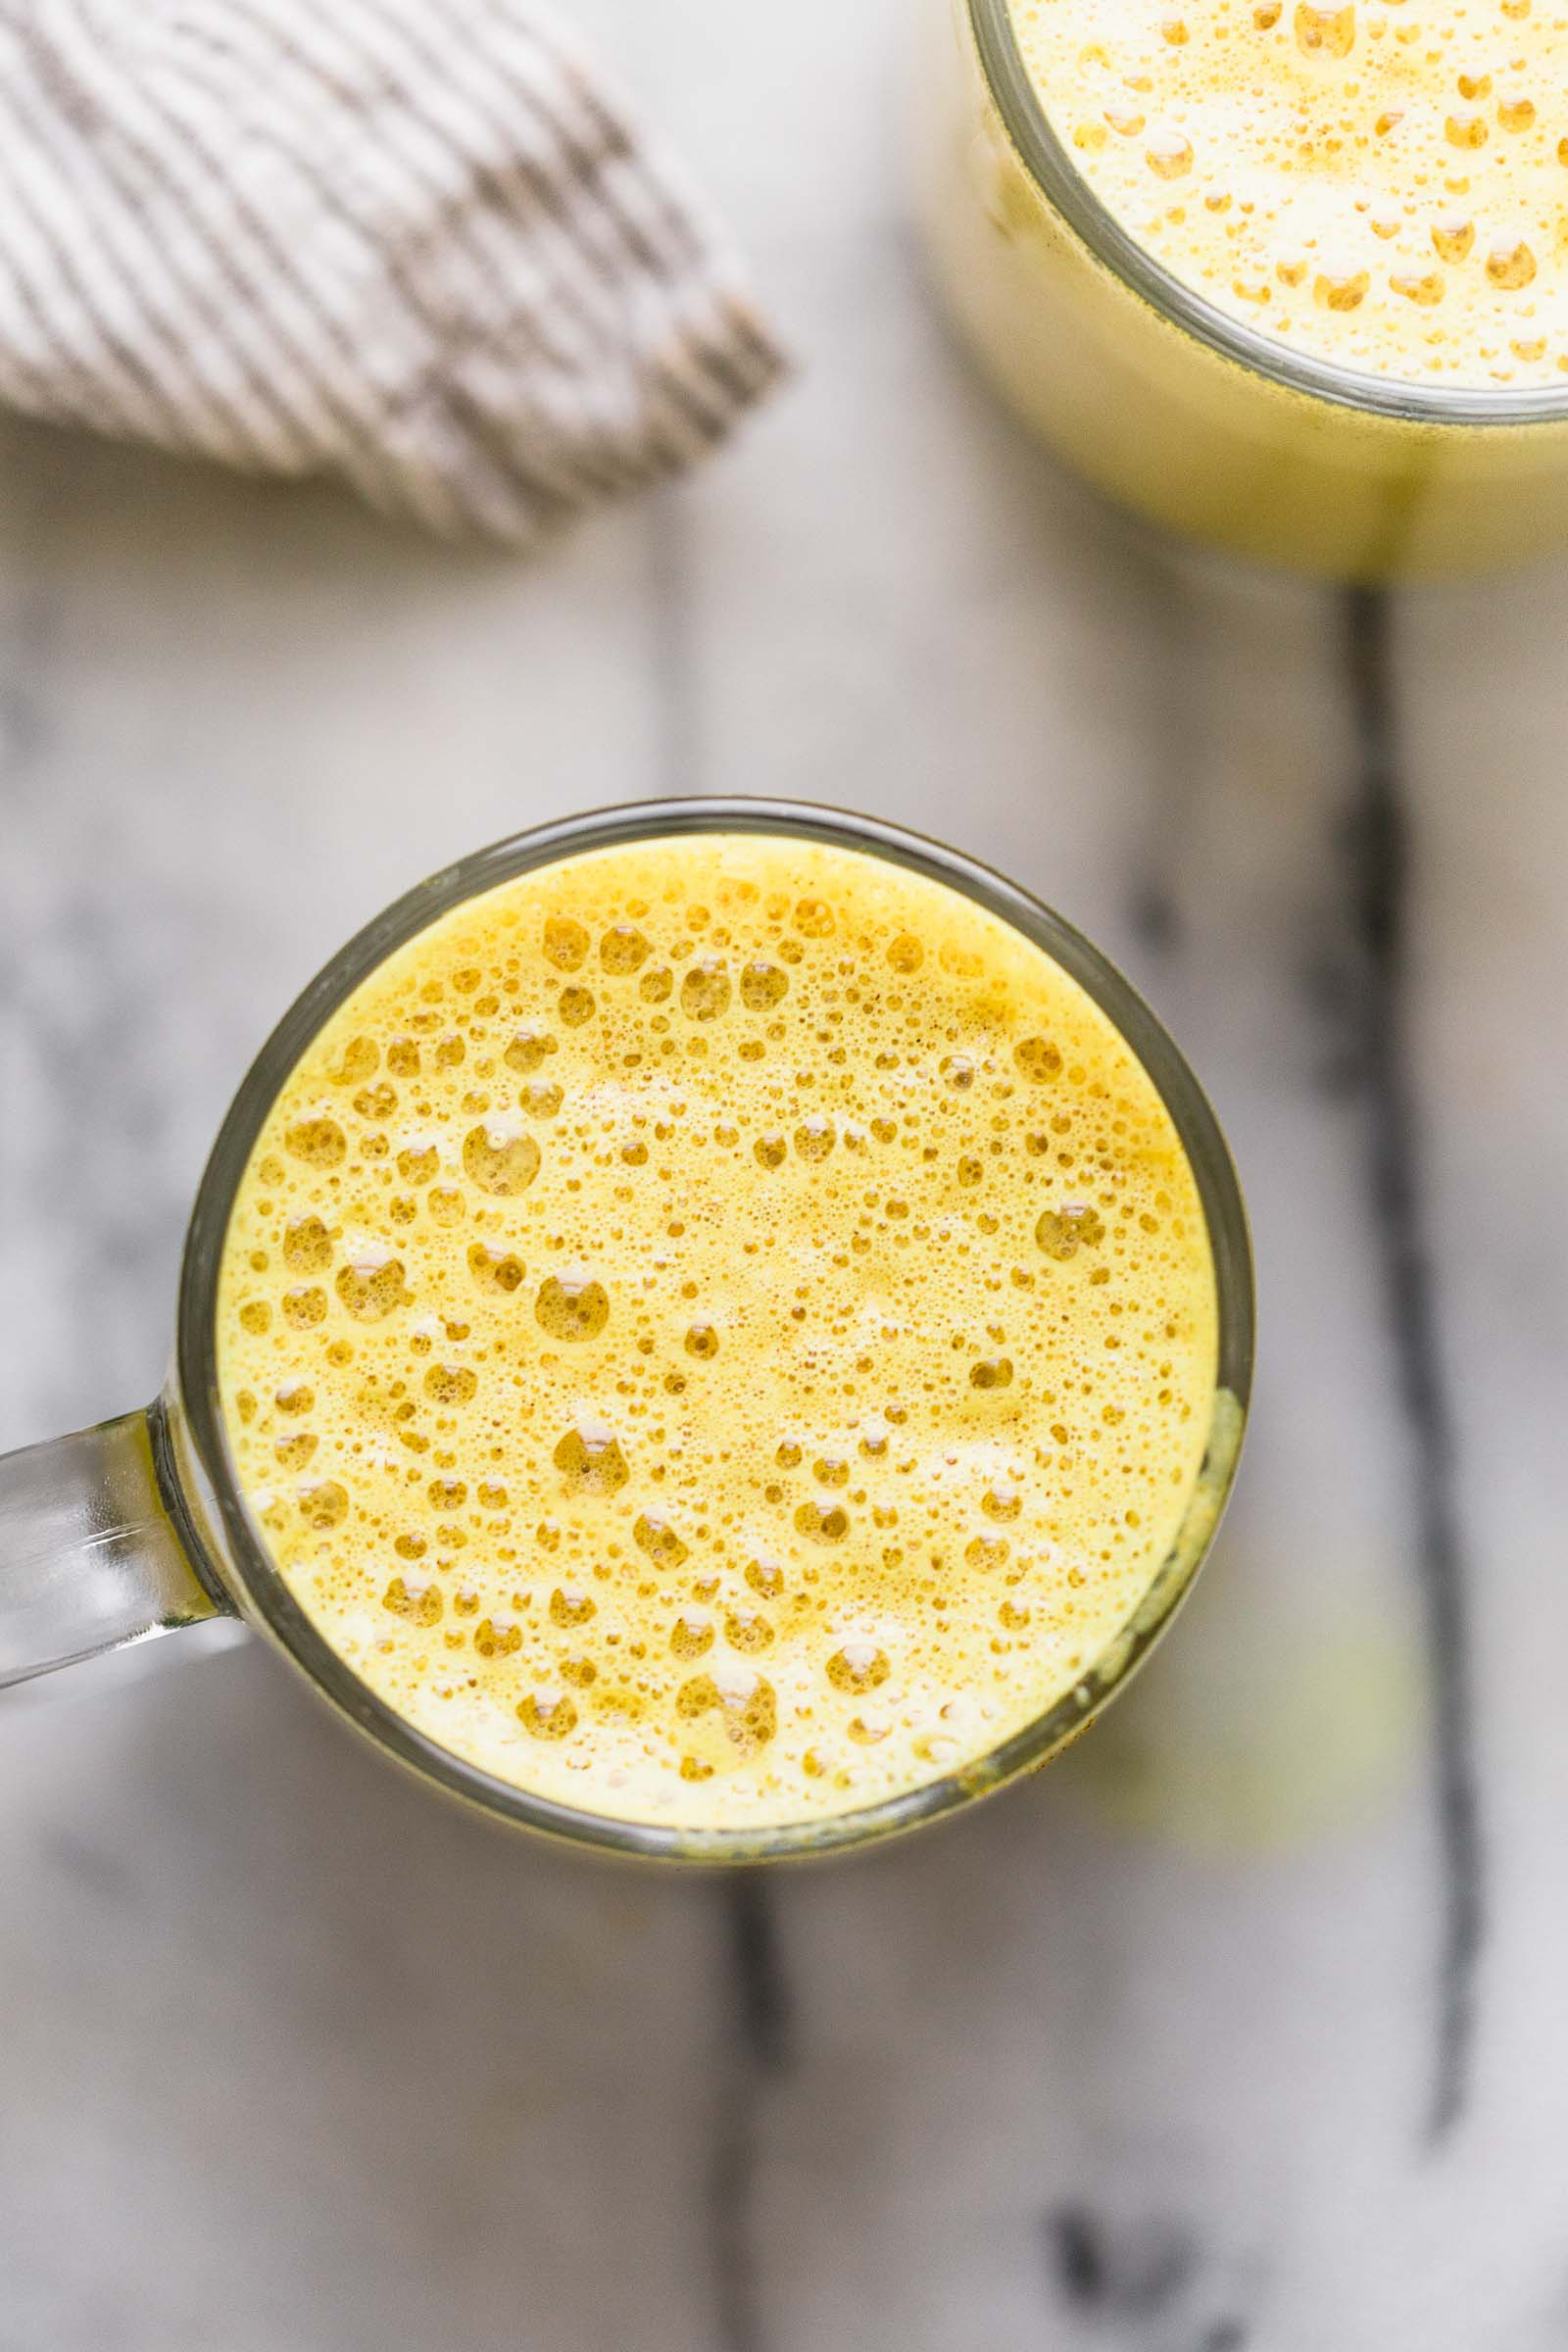 an easy golden turmeric latte recipe that’s just as delicious as it is beautiful! this easy golden turmeric latte is loaded with the warm flavors, antioxidants and anti-inflammatory benefits of turmeric, ginger, and cinnamon. great for a calming morning drink, or an afternoon pick-me-up! #goldenlatte #turmericlatte #healthycoffeerecipe #healthybreakfast #homemadelatte #playswellwithbutter